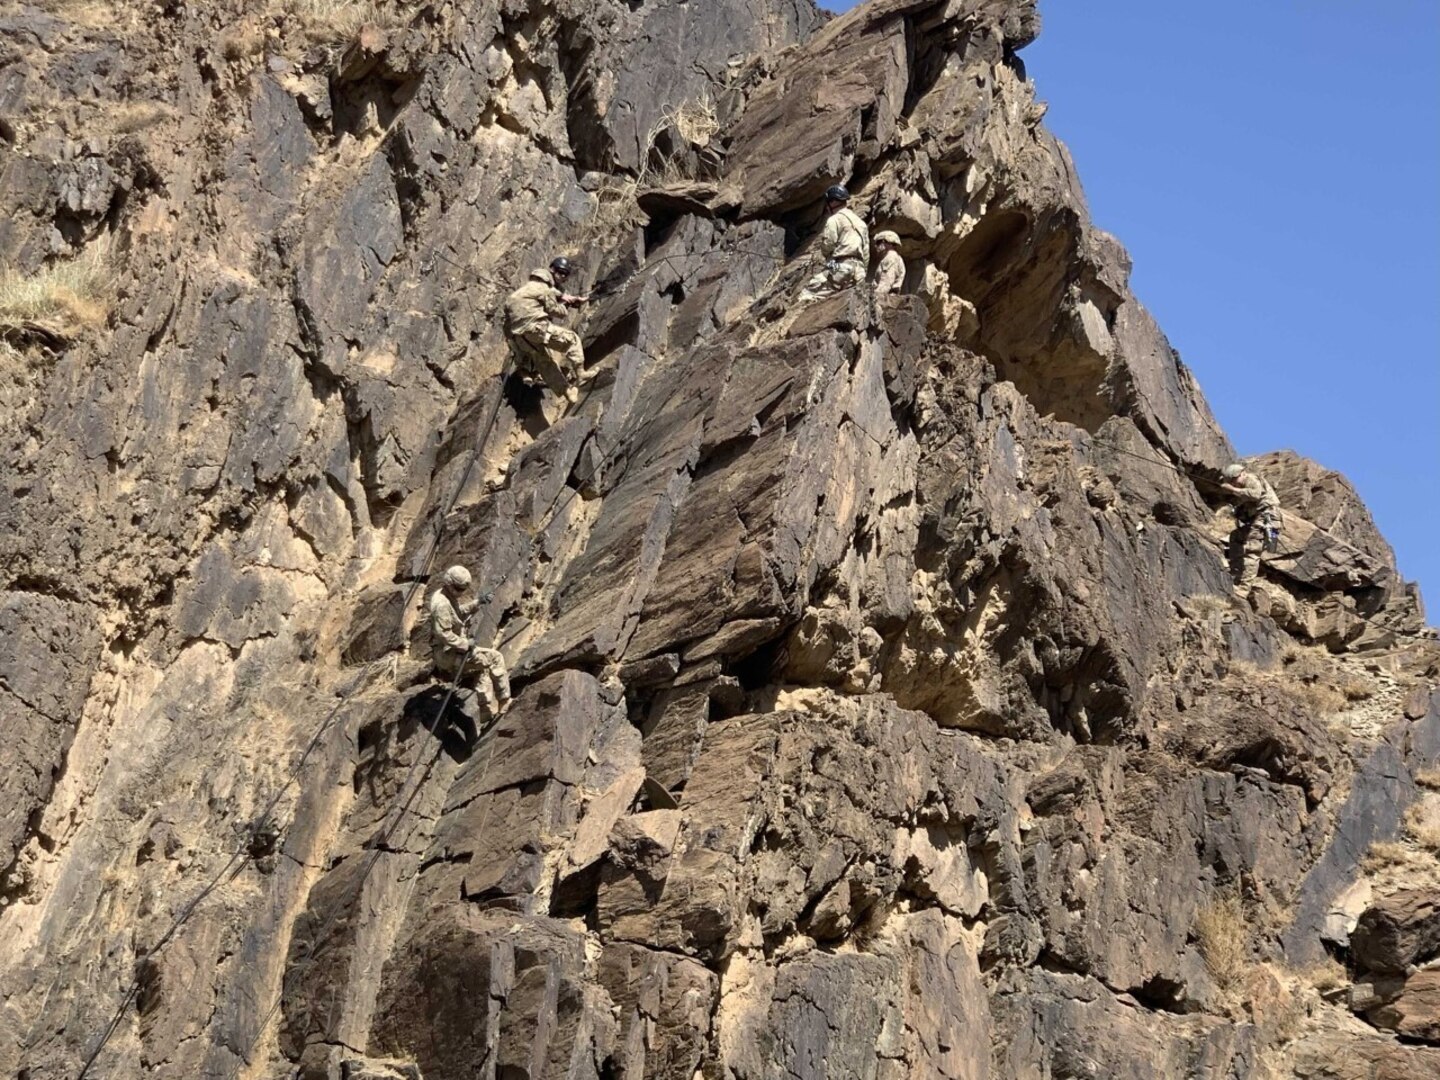 U.S. Army Soldiers from 3rd Battalion, 172 Infantry (Mountain) Headquarters Company and C Company, Vermont National Guard, conduct mountain training with Royal Saudi Land Forces at the RSLF Mountain Warfare School in Saudi Arabia. About 70 U.S. Army Soldiers attended the training in October and November.